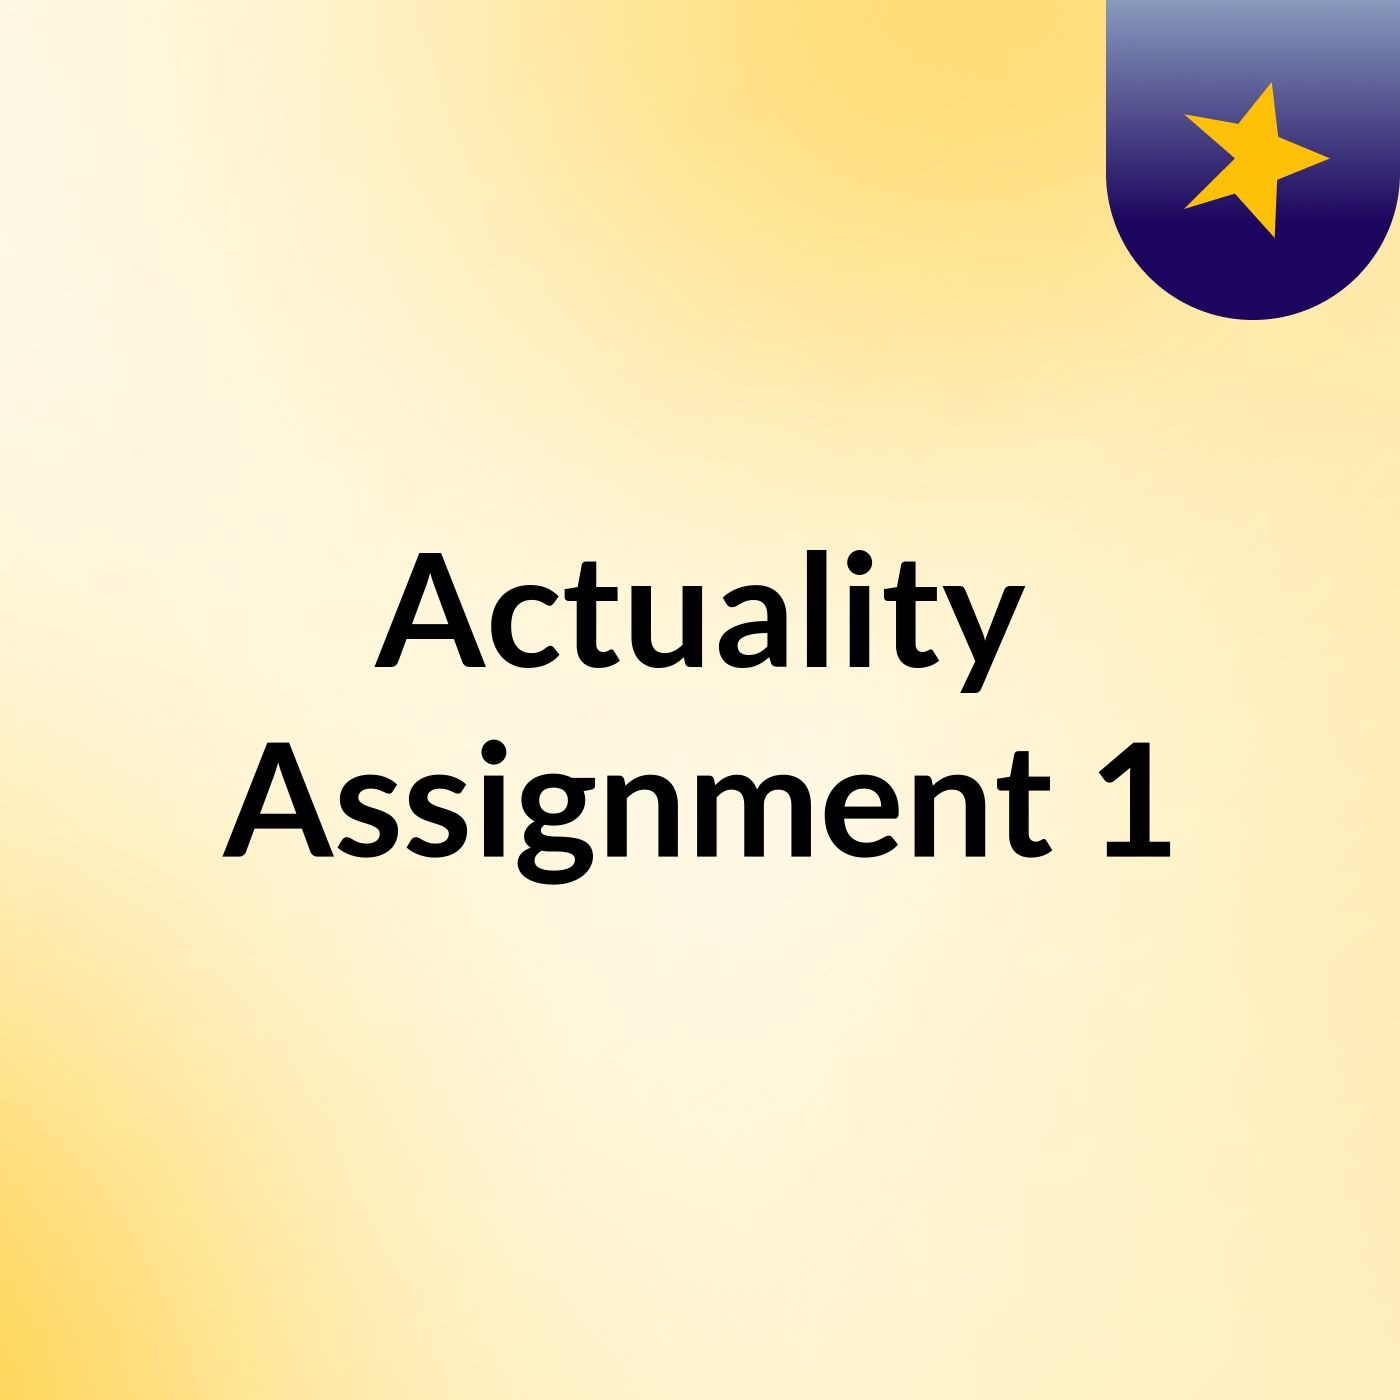 Episode 6 - Actuality Assignment 1